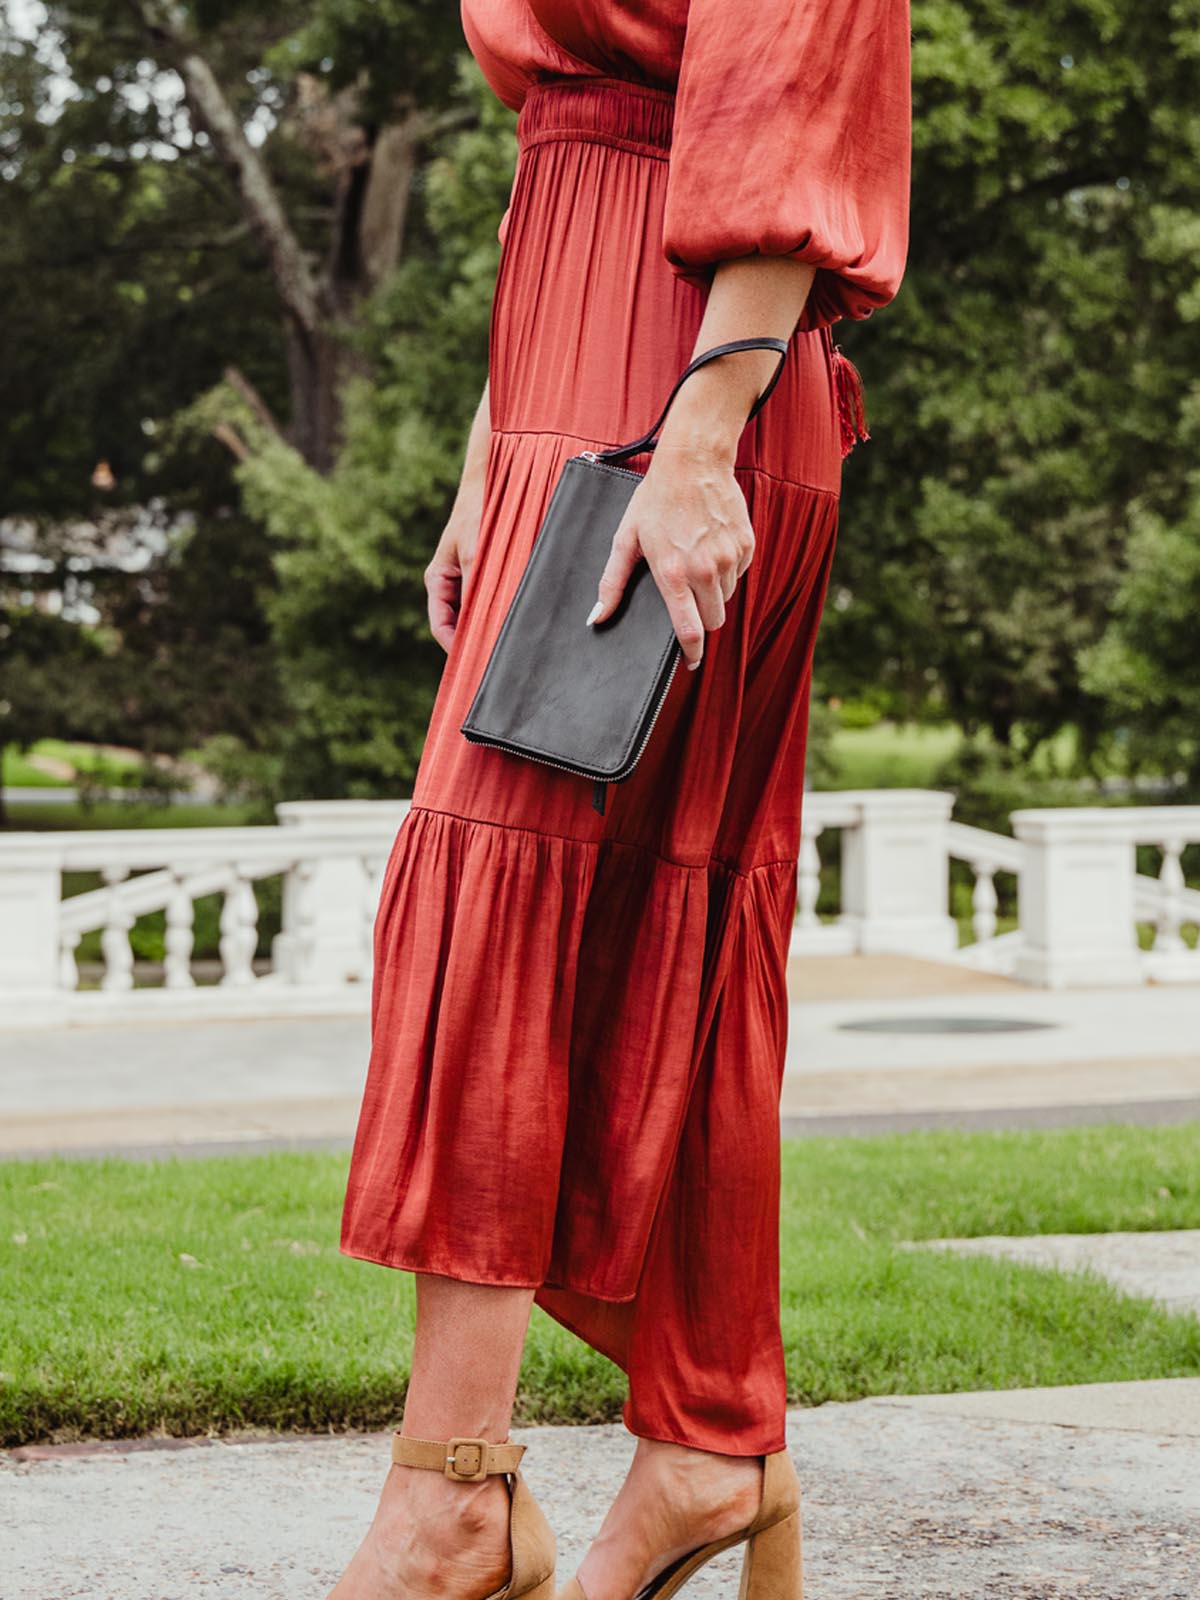 model wearing red dress while holding black clutch wallet